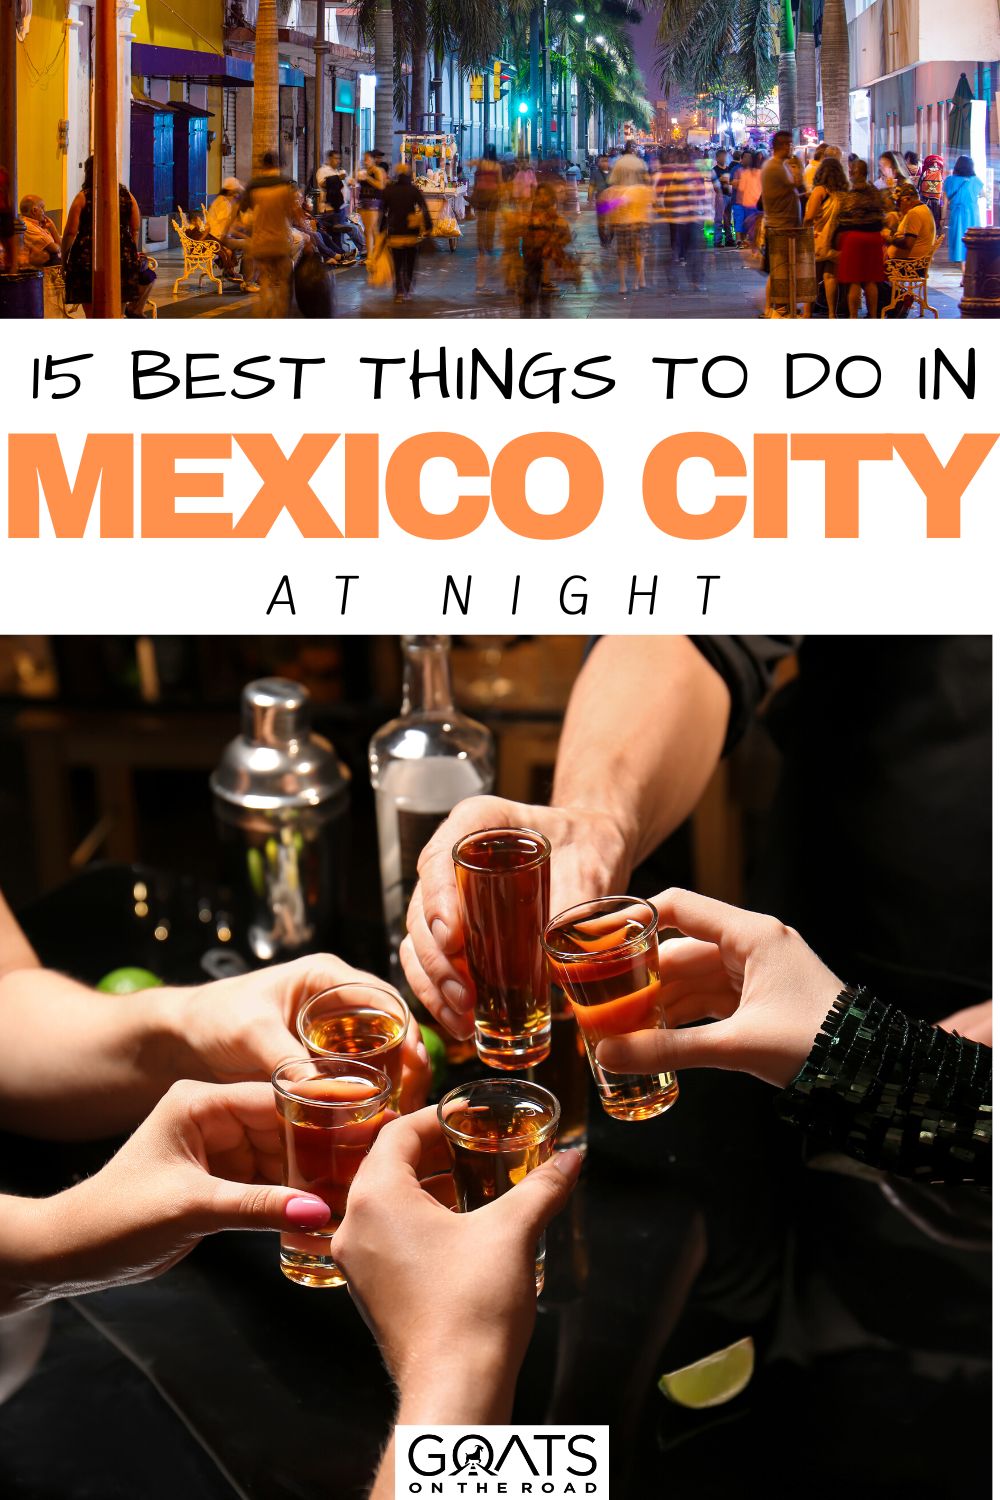 “15 Best Things To Do in Mexico City at Night